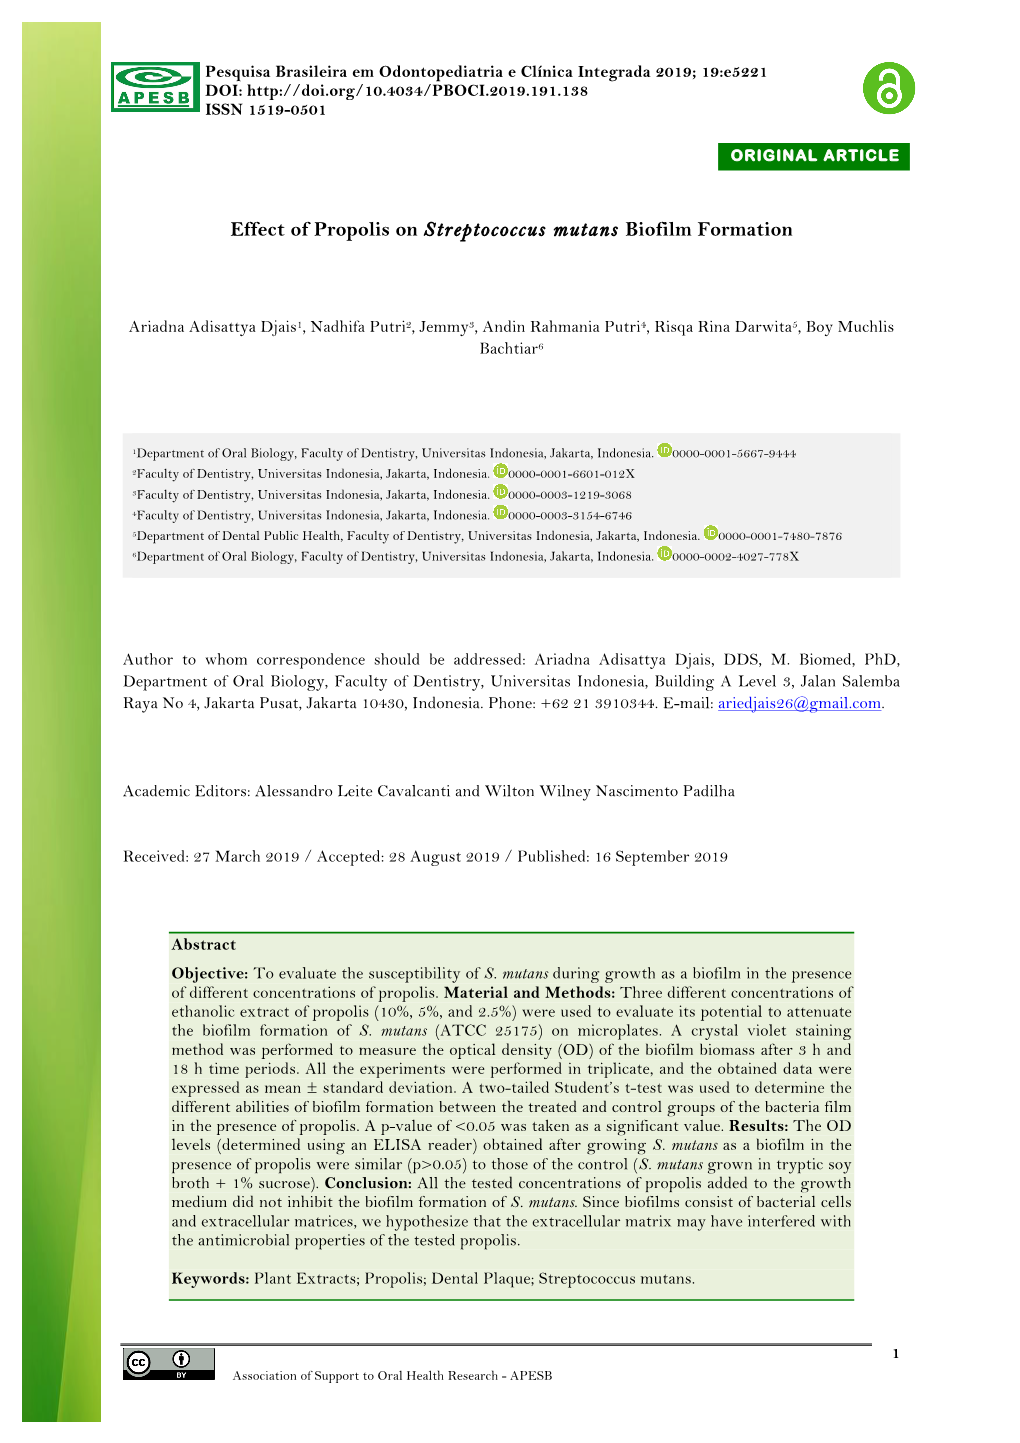 Effect of Propolis on Streptococcus Mutans Biofilm Formation